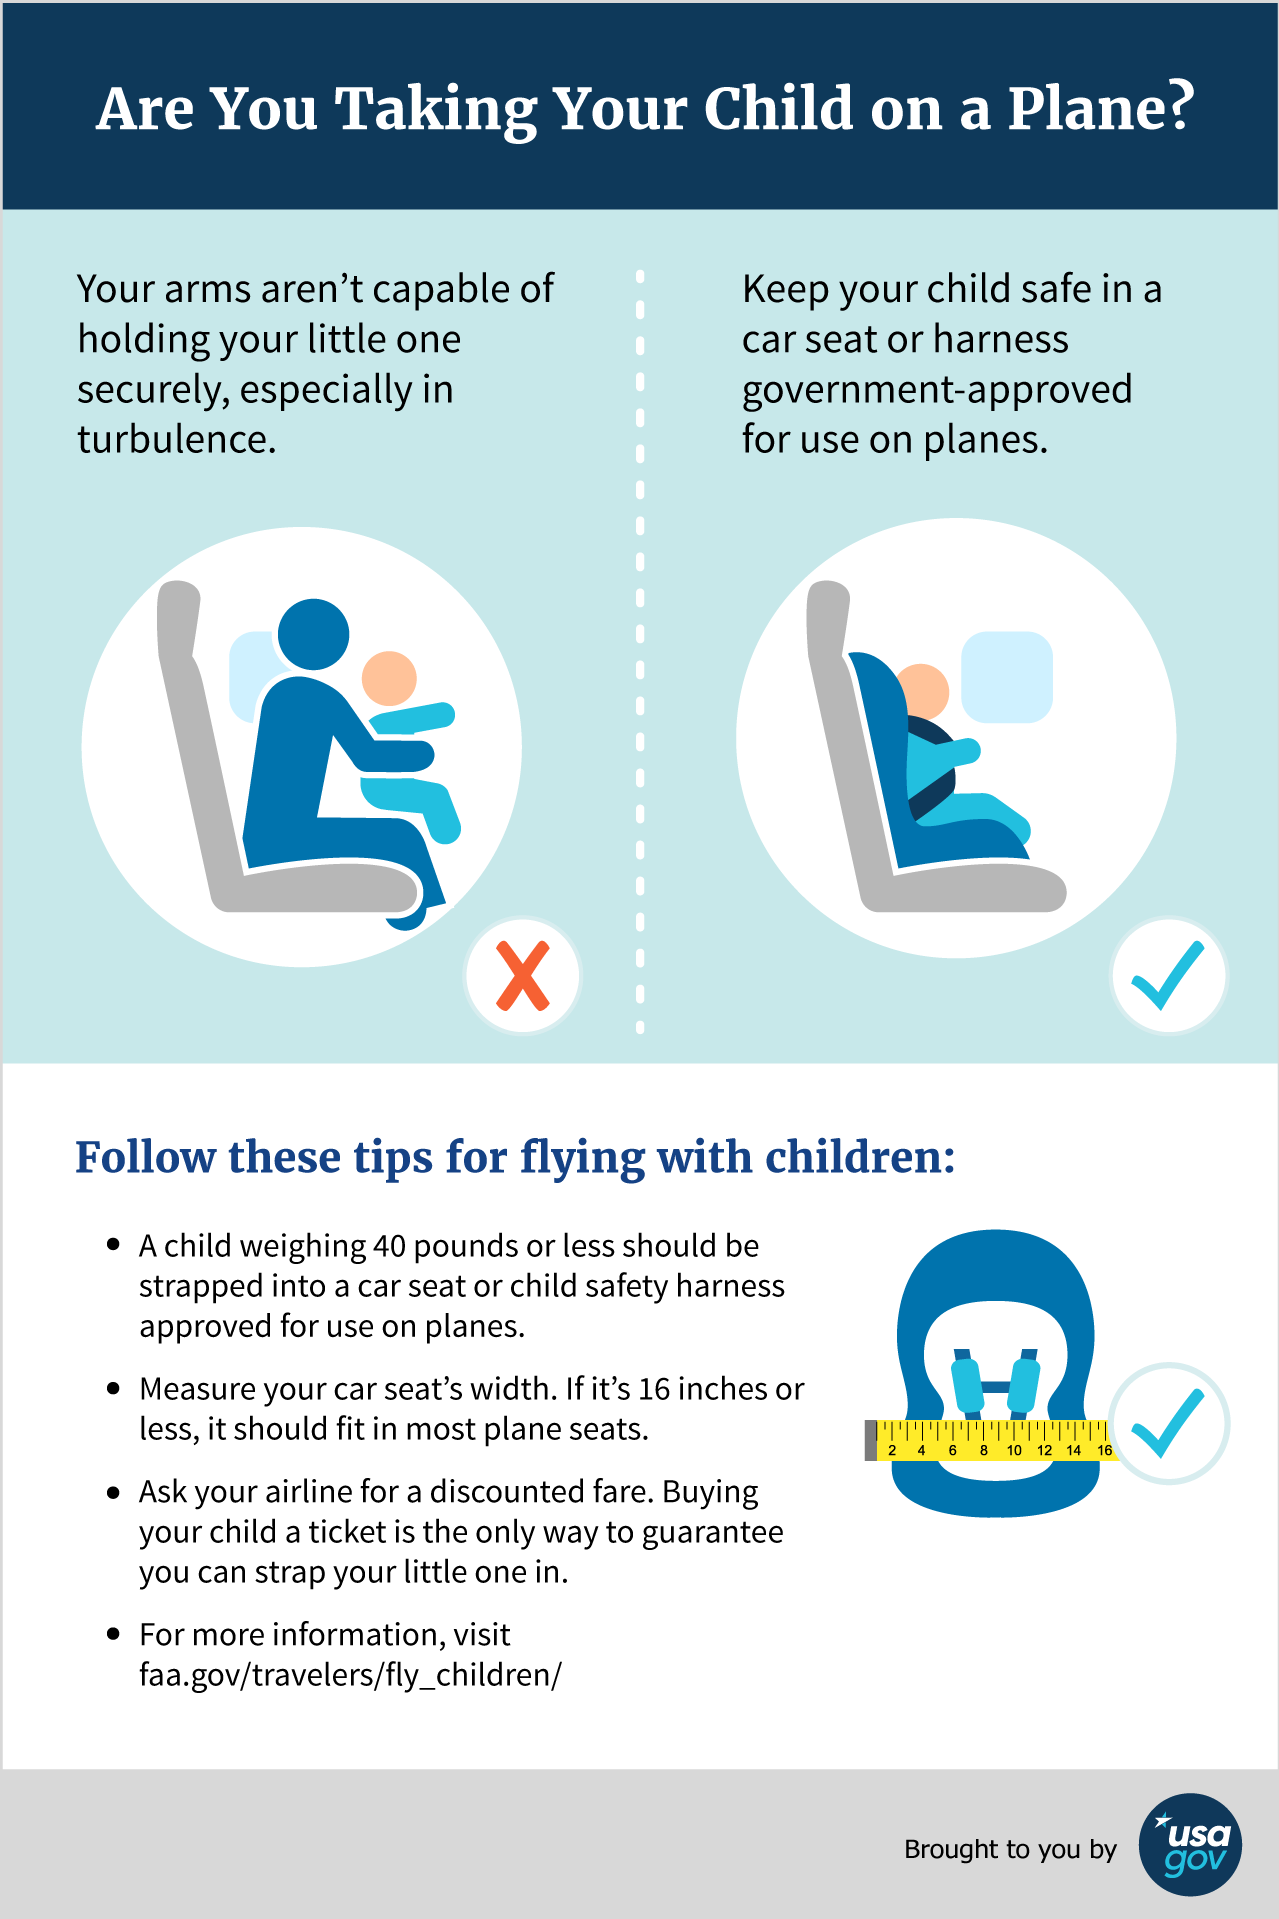 Are You Taking Your Child on a Plane? Description of Infographic below.